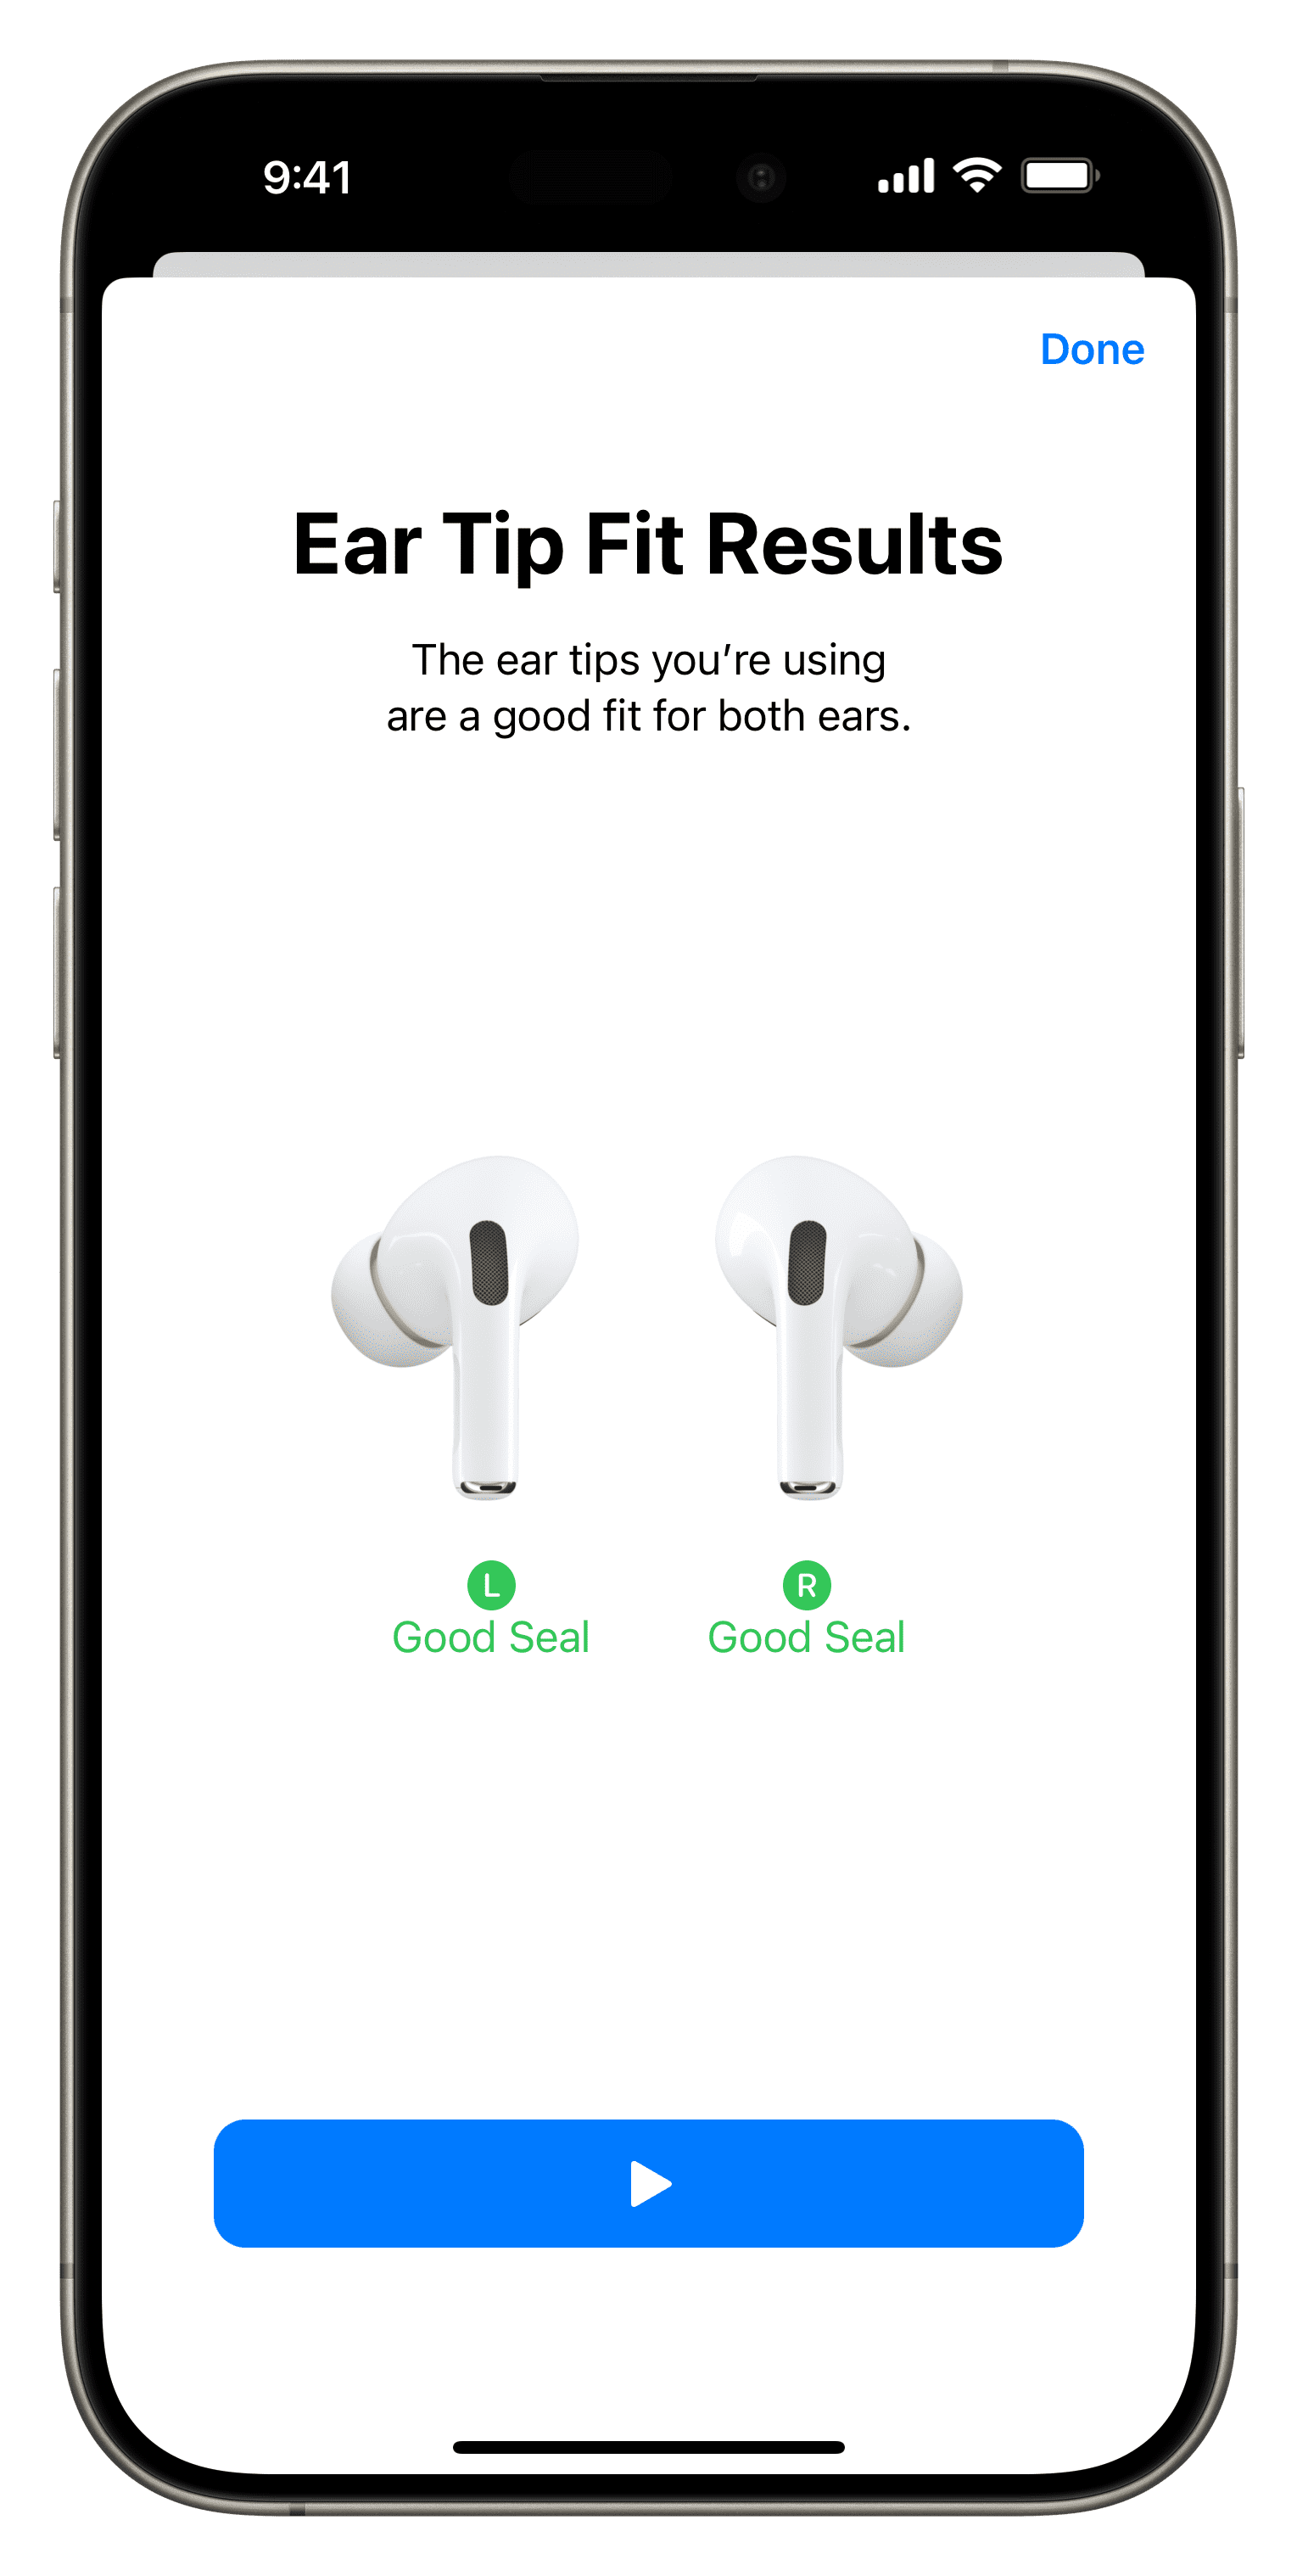 Good Ear Tip Fit Results for AirPods Pro